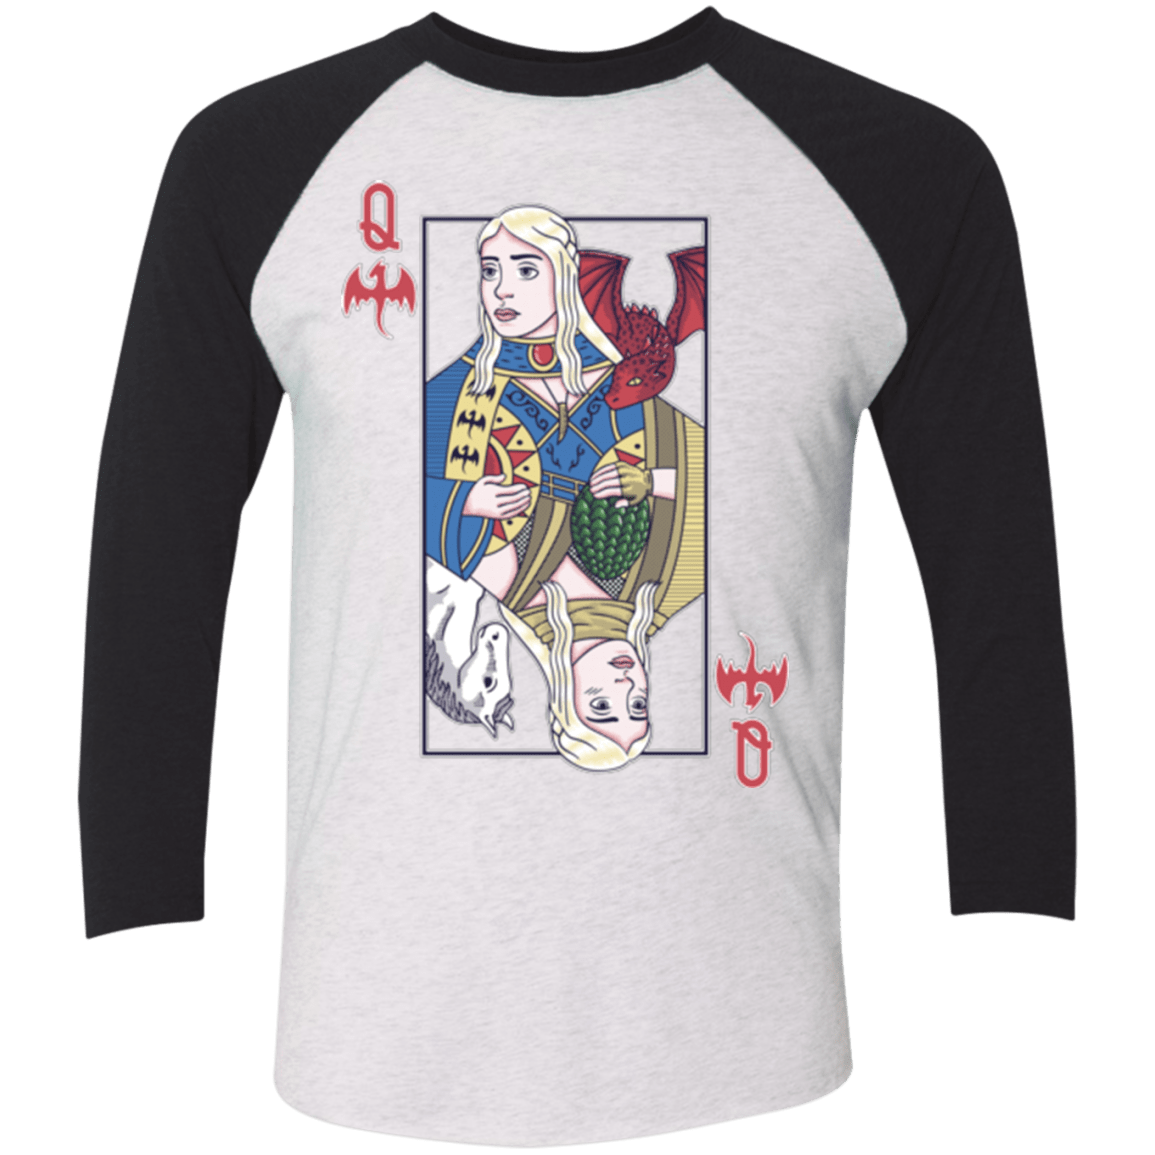 T-Shirts Heather White/Vintage Black / X-Small Queen of Dragons Men's Triblend 3/4 Sleeve